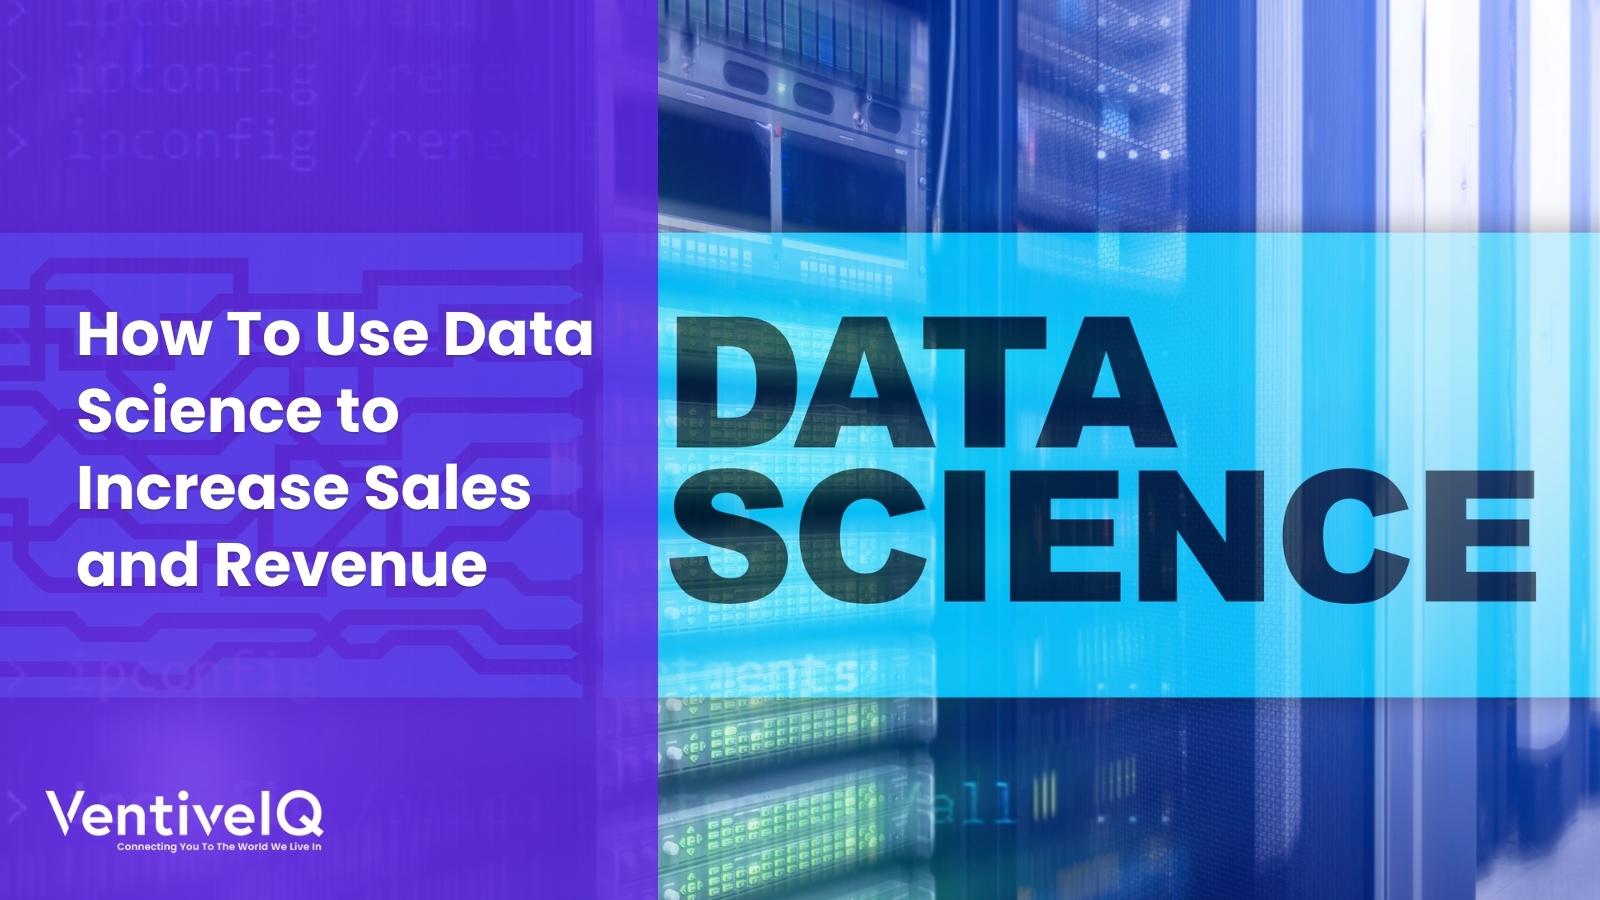 How To Use Data Science to Increase Sales and Revenue